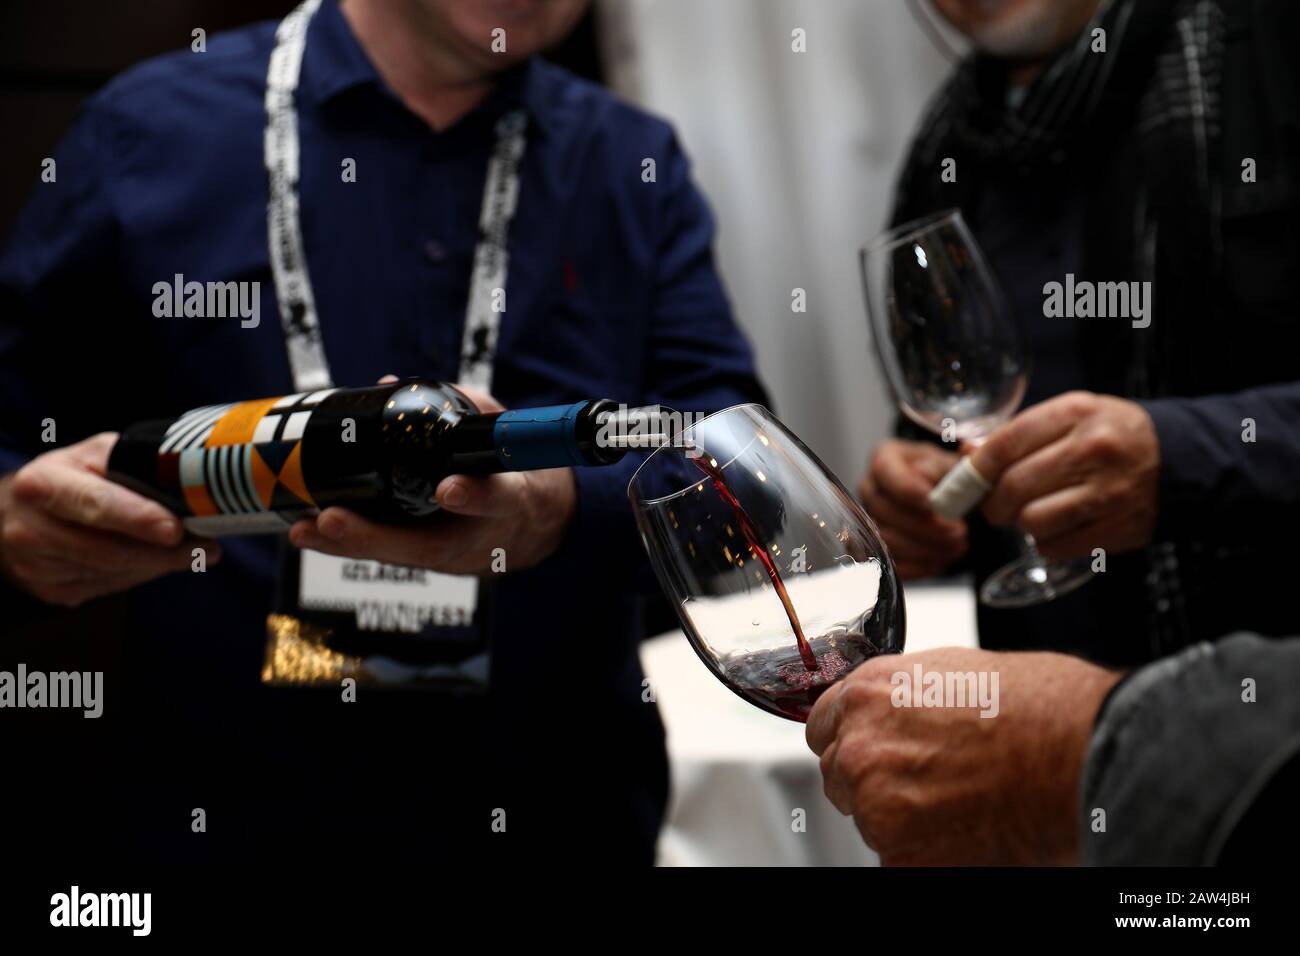 Sarajevo, Bosnia and Herzegovina (BiH). 6th Feb, 2020. An exhibitor pours wine at the Sarajevo Wine Fest, an international wine festival, in Sarajevo, Bosnia and Herzegovina (BiH), on Feb. 6, 2020. The two-day Sarajevo Wine Fest kicked off in Sarajevo on Thursday. The festival presents renowned local and regional wineries. Local distributors showcase wines from France, Spain, Italy, etc. Credit: Nedim Grabovica/Xinhua/Alamy Live News Stock Photo